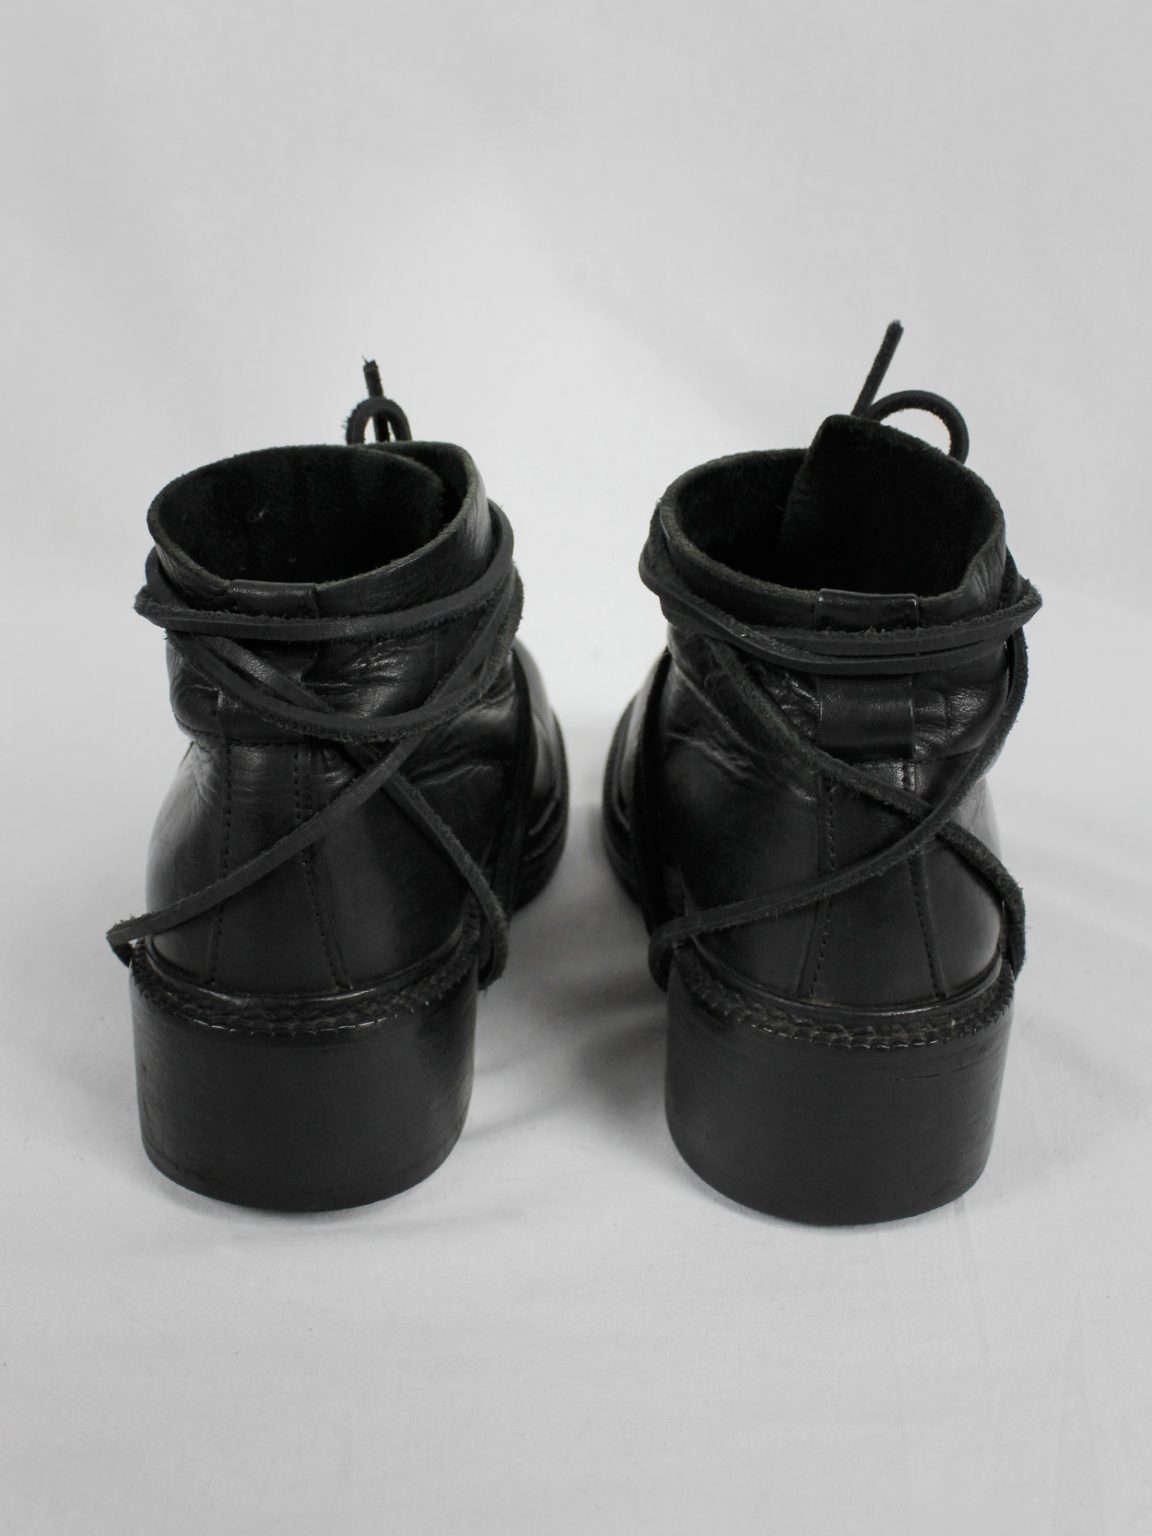 Dirk Bikkembergs black boots with flap and laces through the soles (38) — late 90's